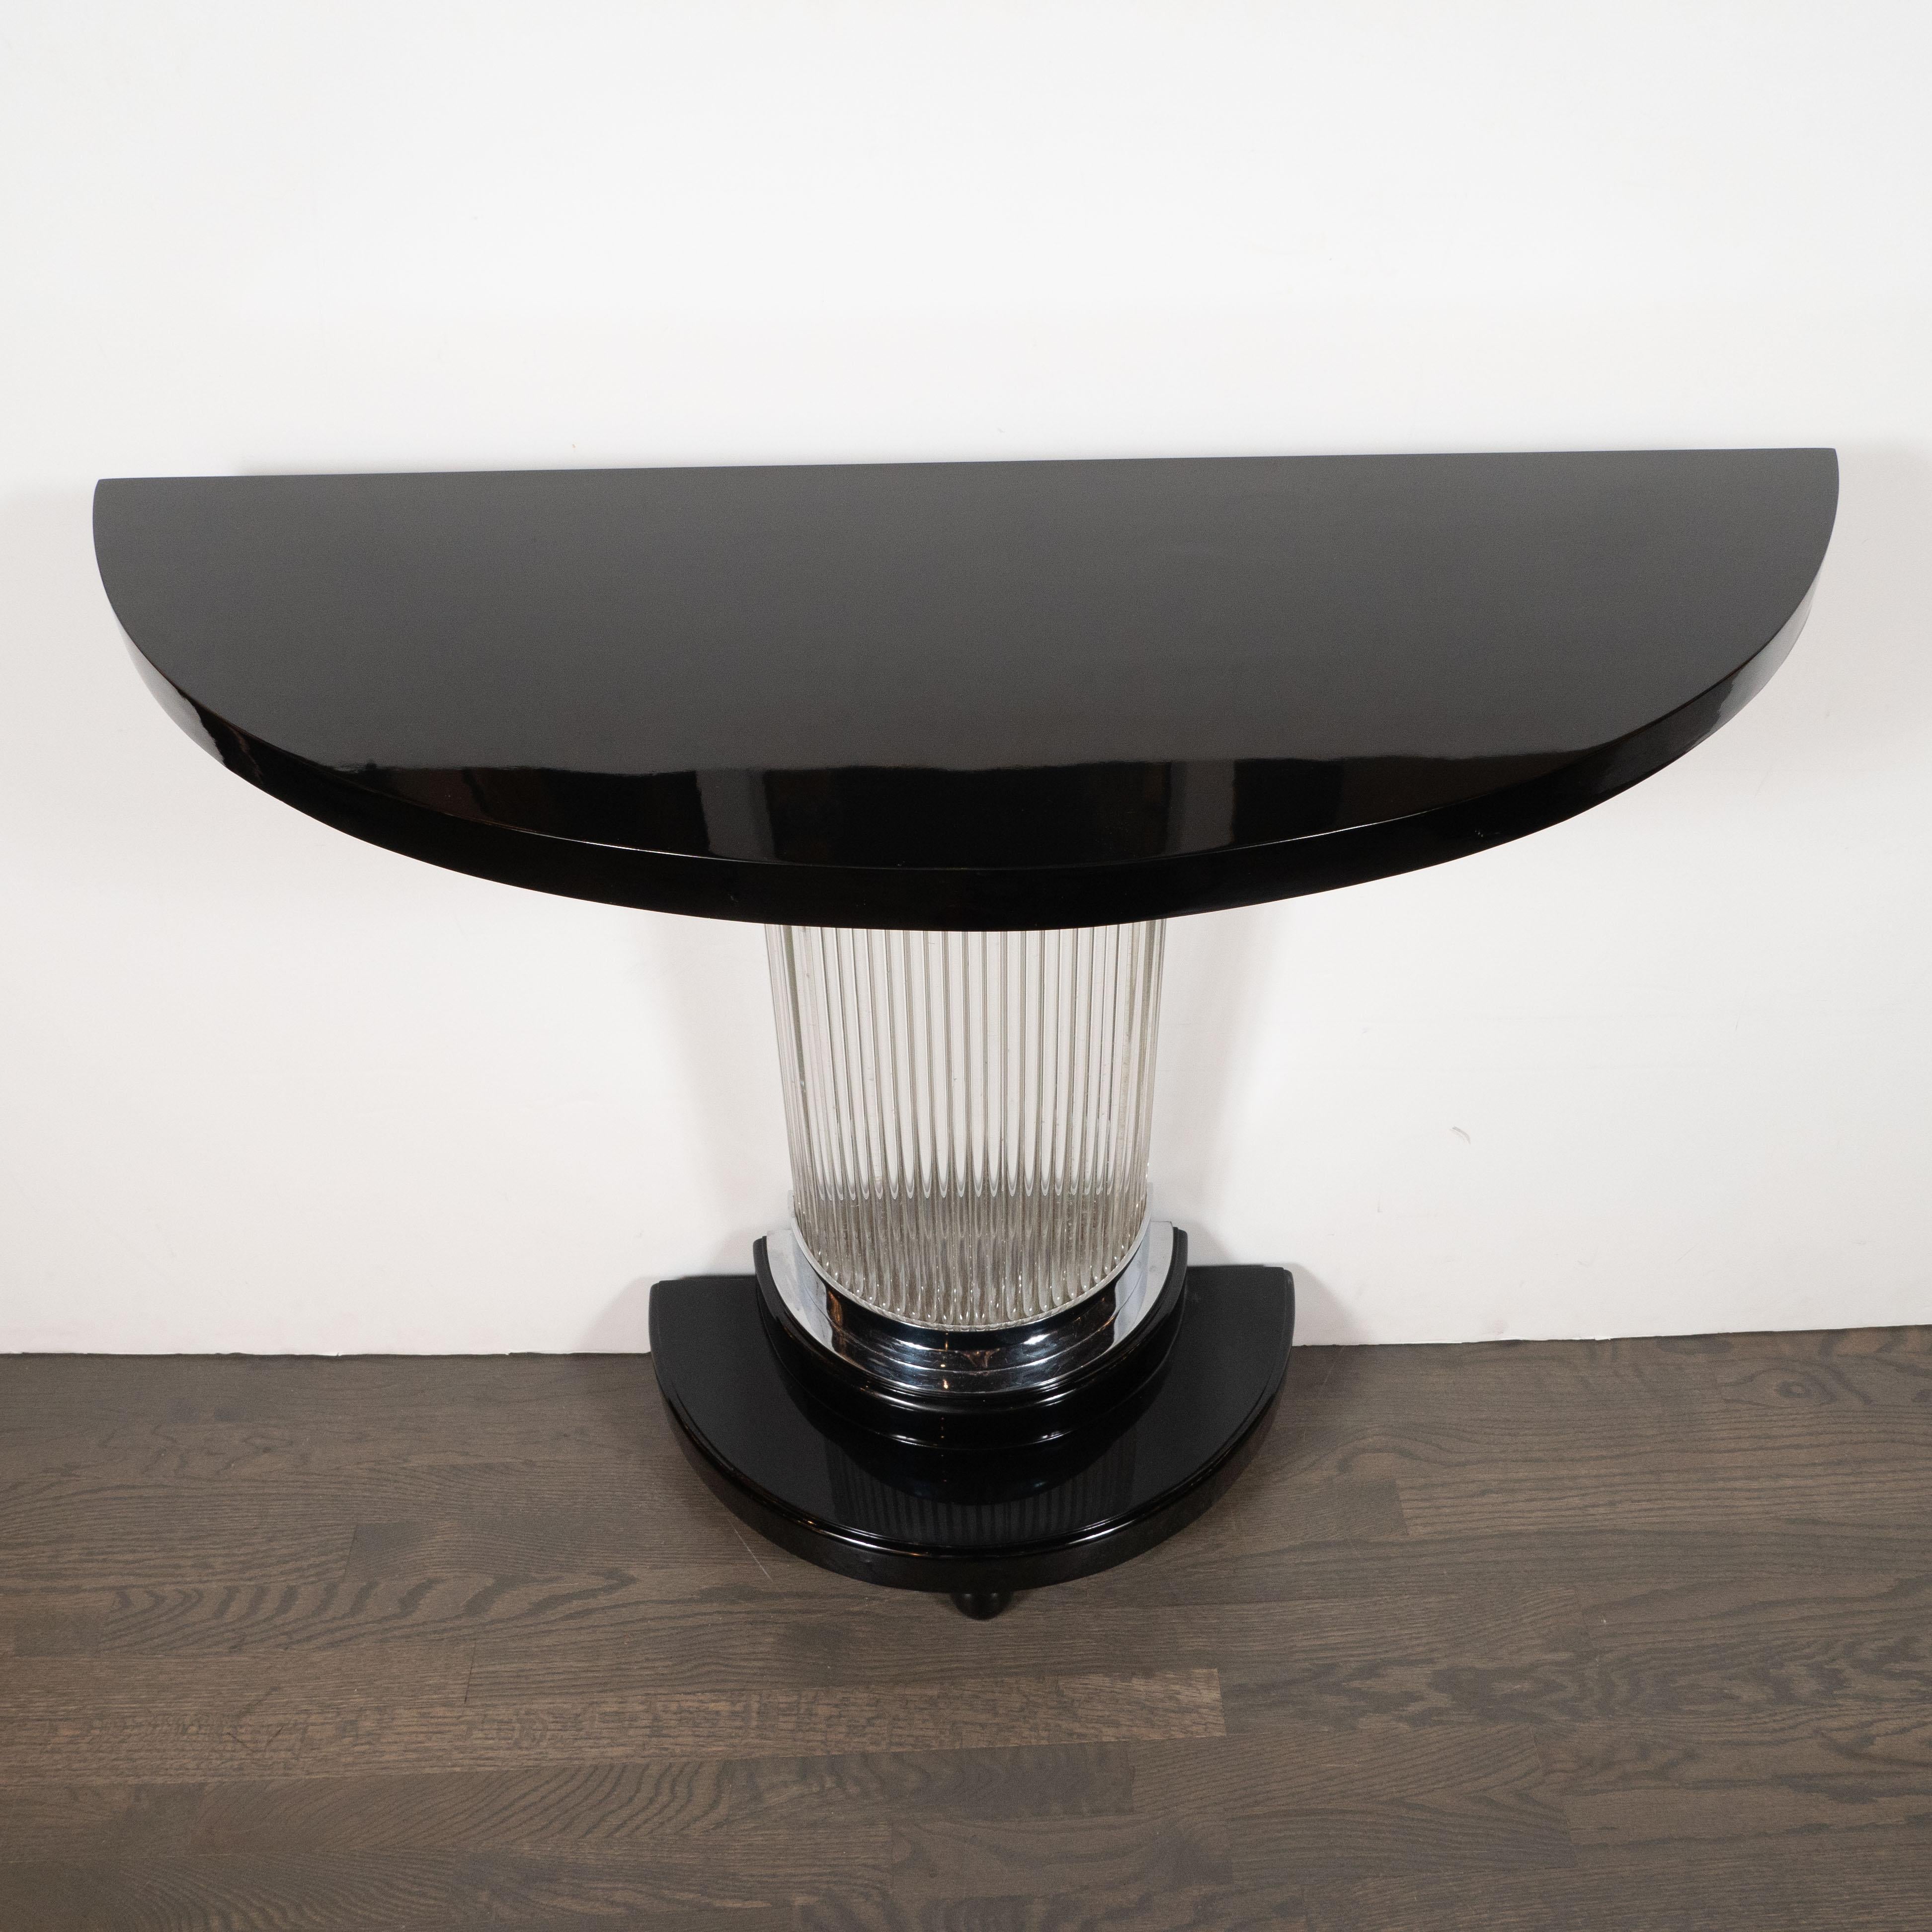 Art Deco Streamlined Black Lacquer Demilune Console Table with Glass Rods 1